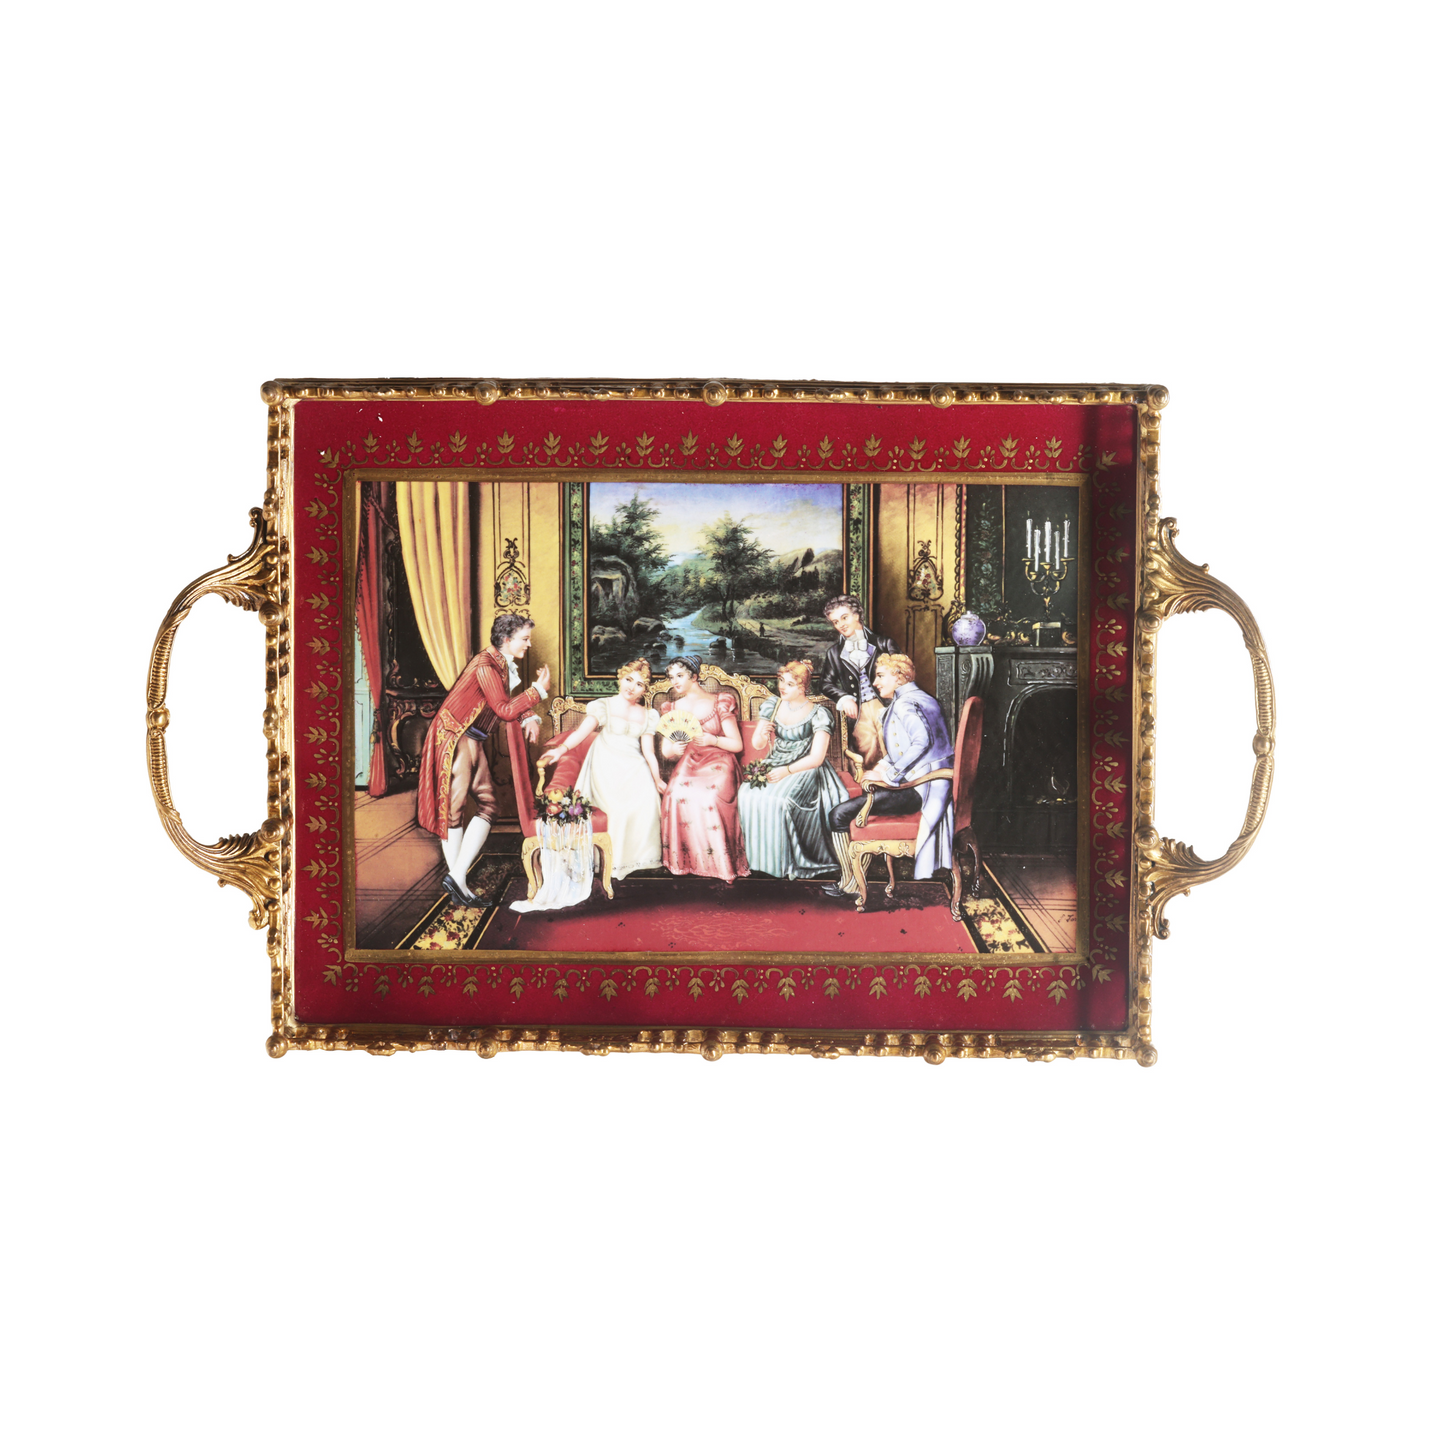 Hand-painted Society Porcelain and Bronze Serving Tray